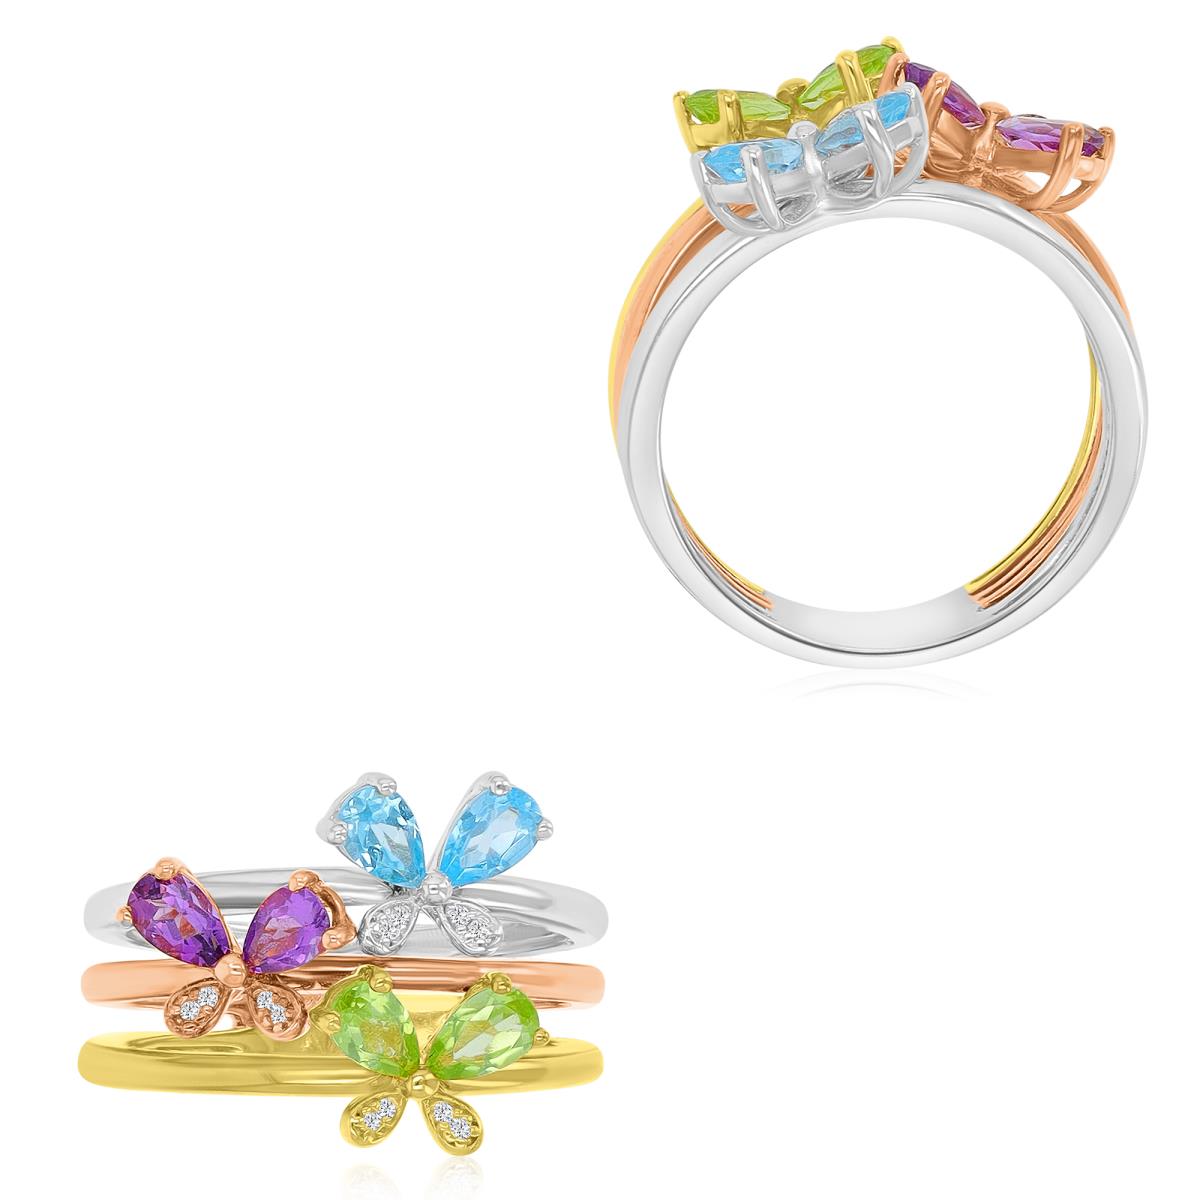 Sterling Silver 1Micron 14K Tricolor Plating 0.04 CTTW Rnd Diam & PS Multicolor Flowers Open Rows Ring